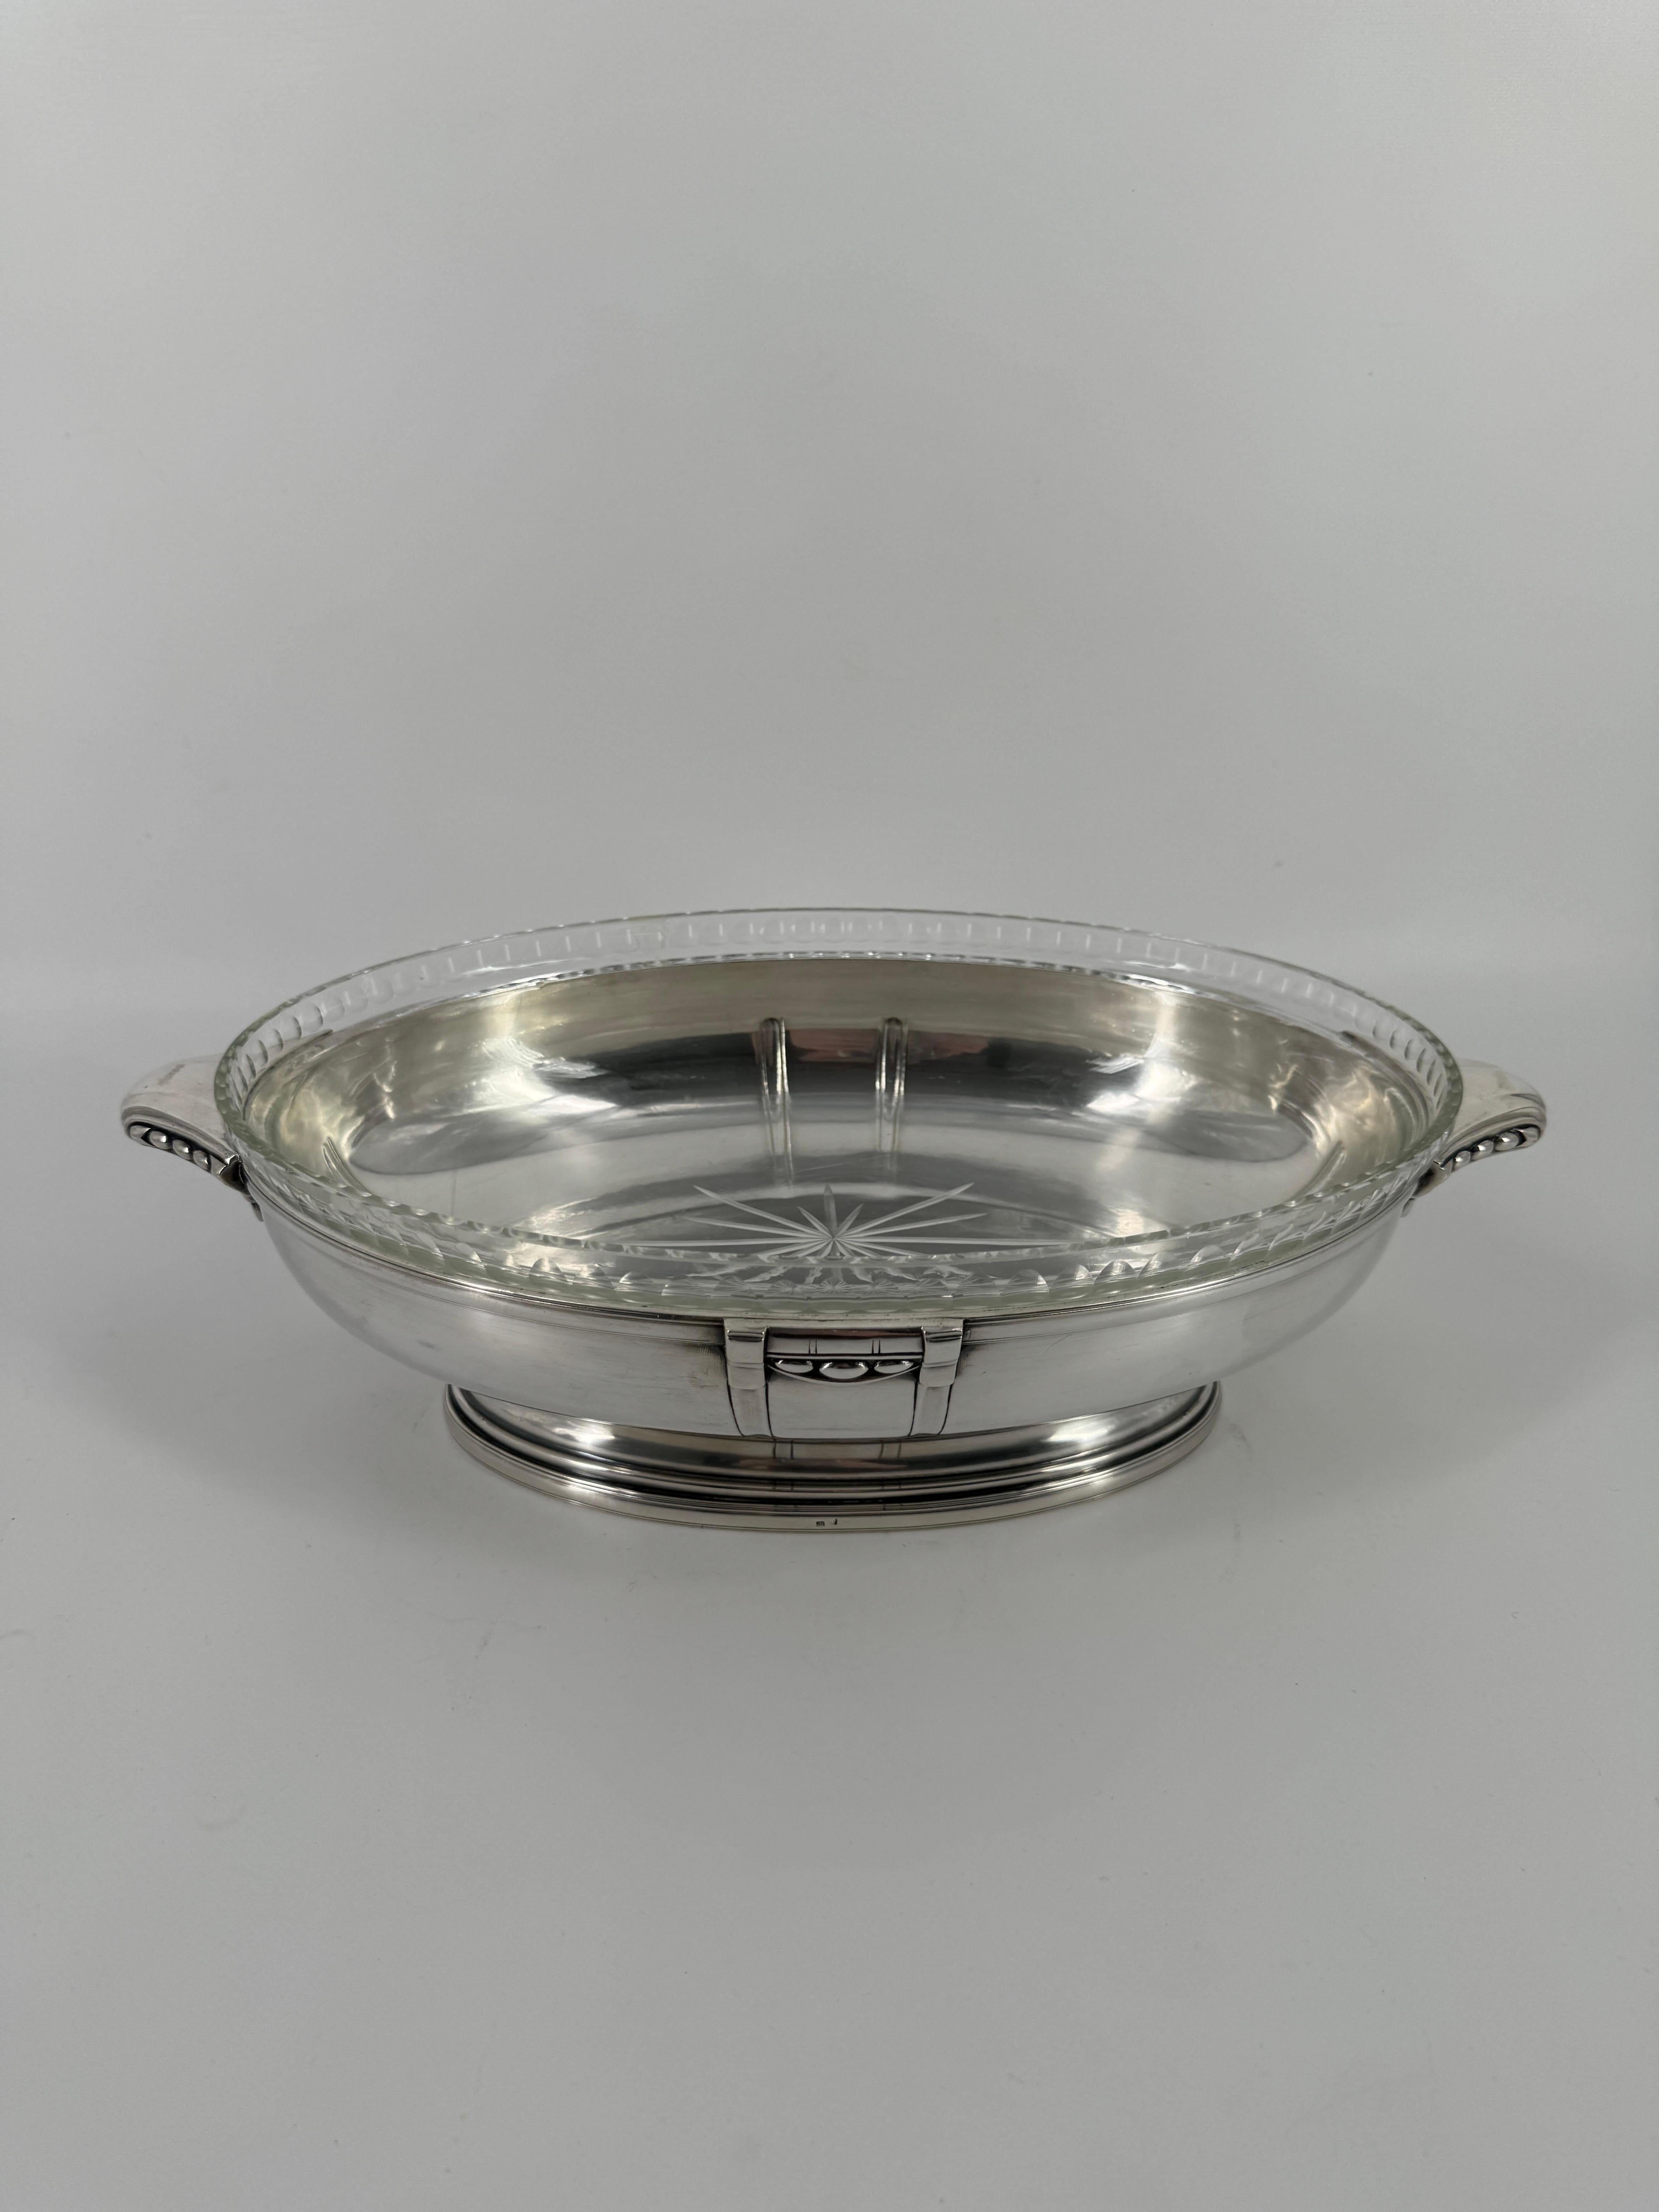 Art Deco French Center Piece, Silver Plated Attributed to Sue & Mare For Sale 3